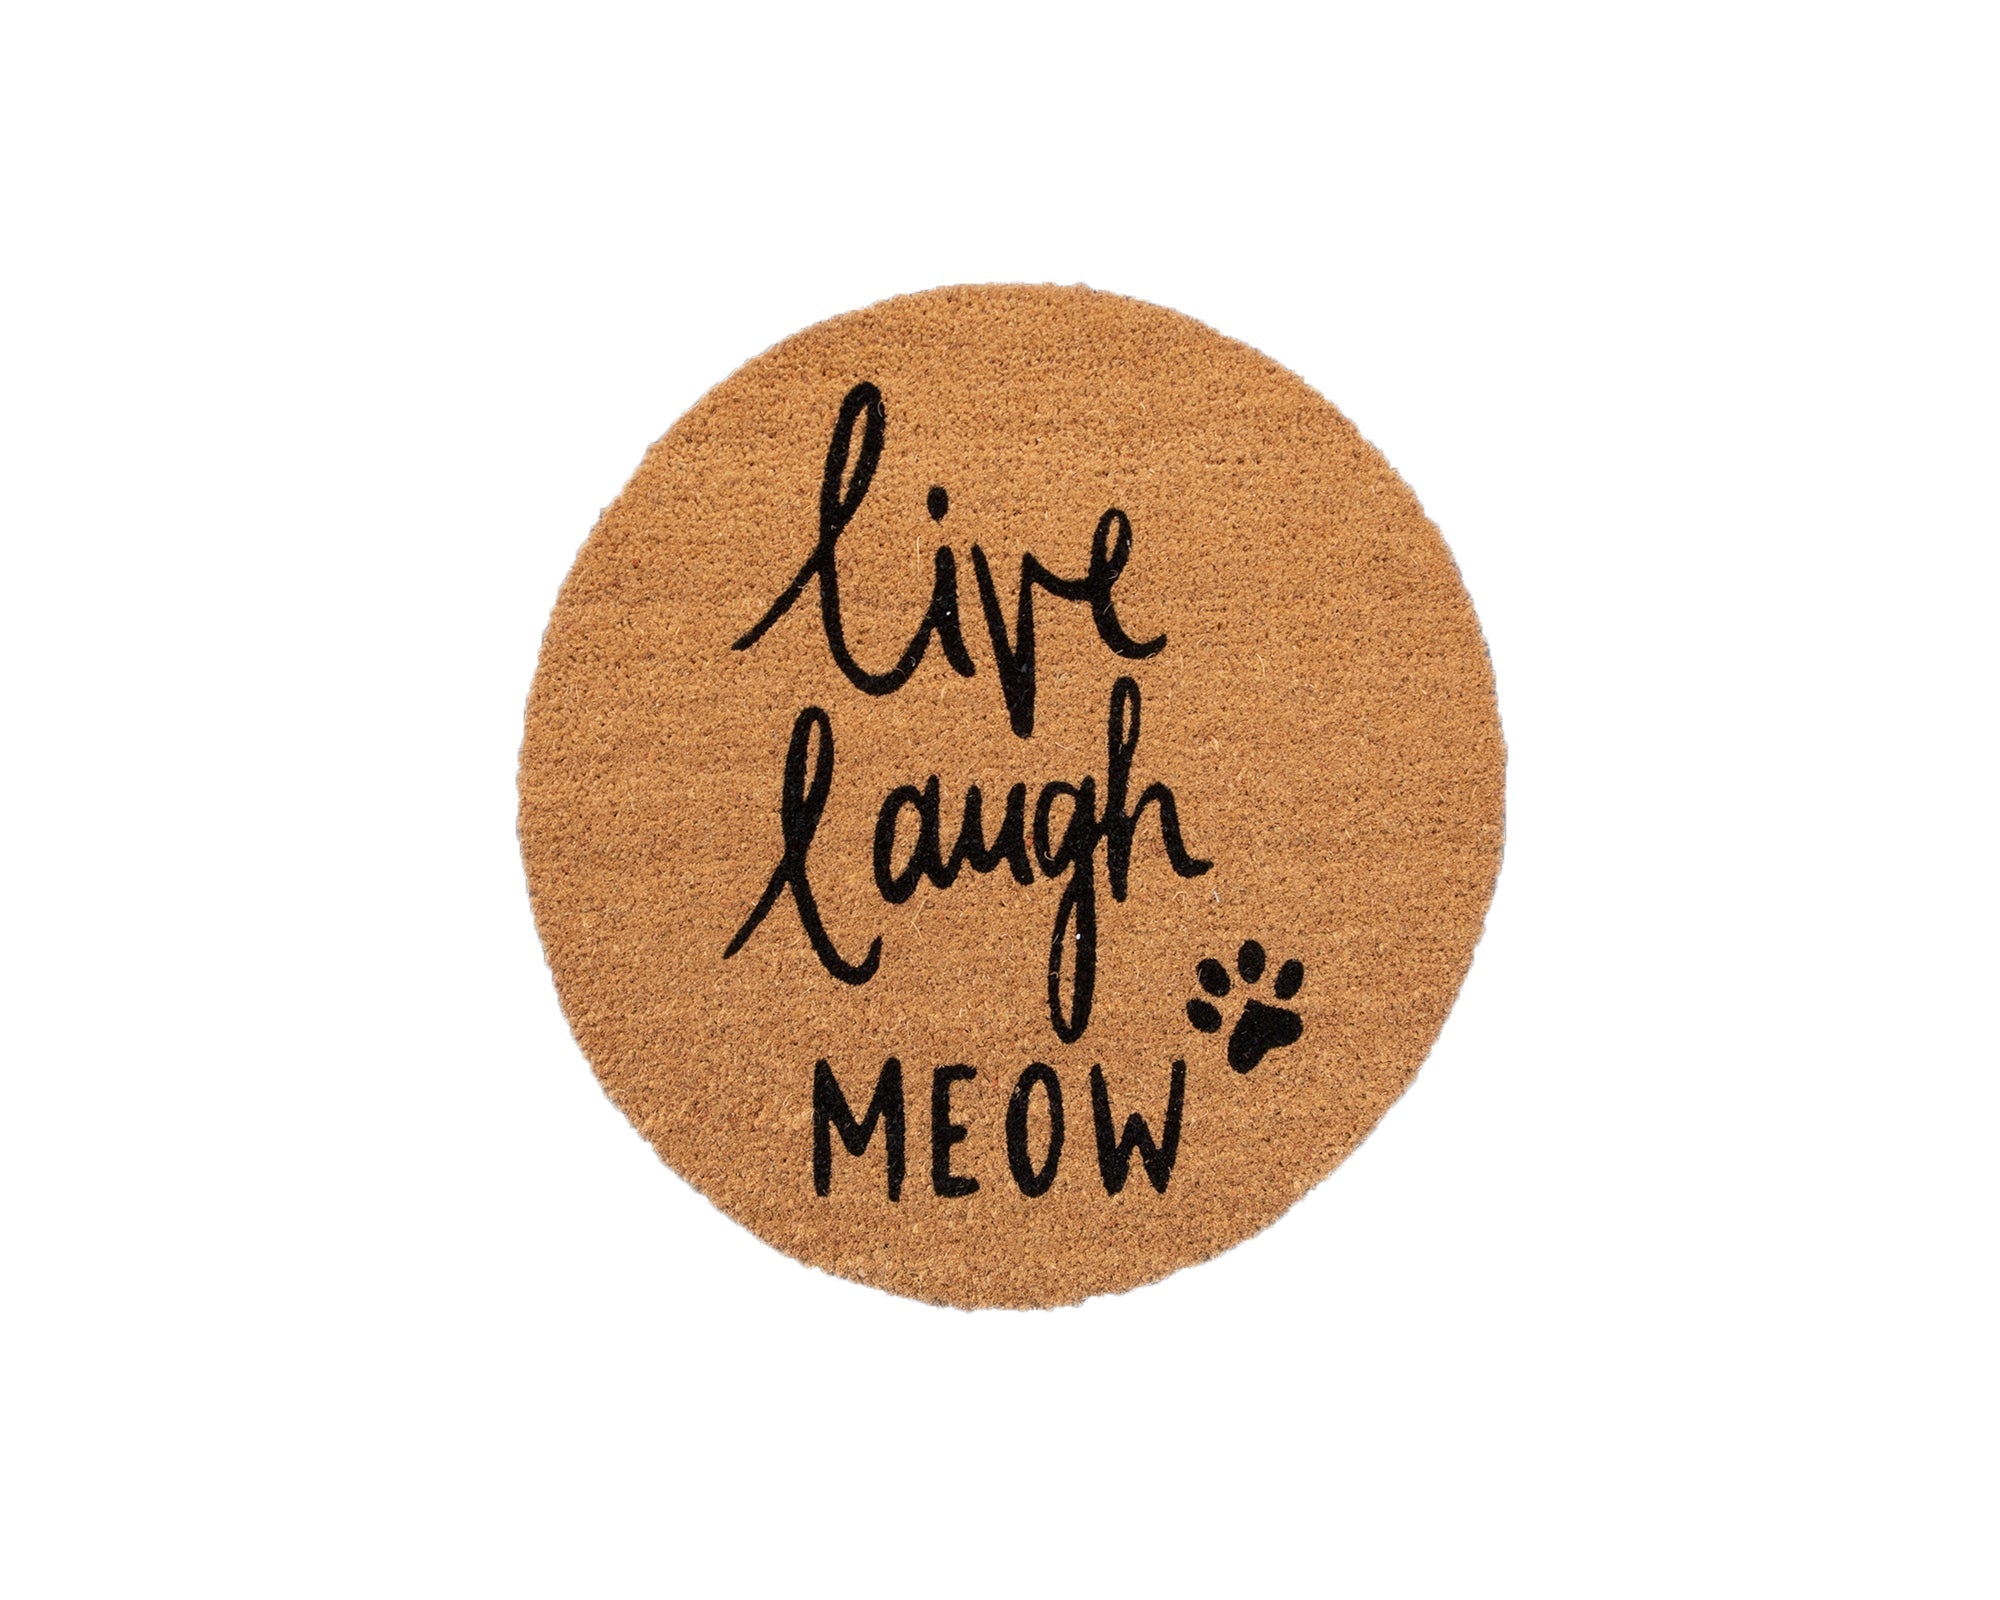 4CatsnDogs- Convertible Entrance Mat " Live, Live Meow"